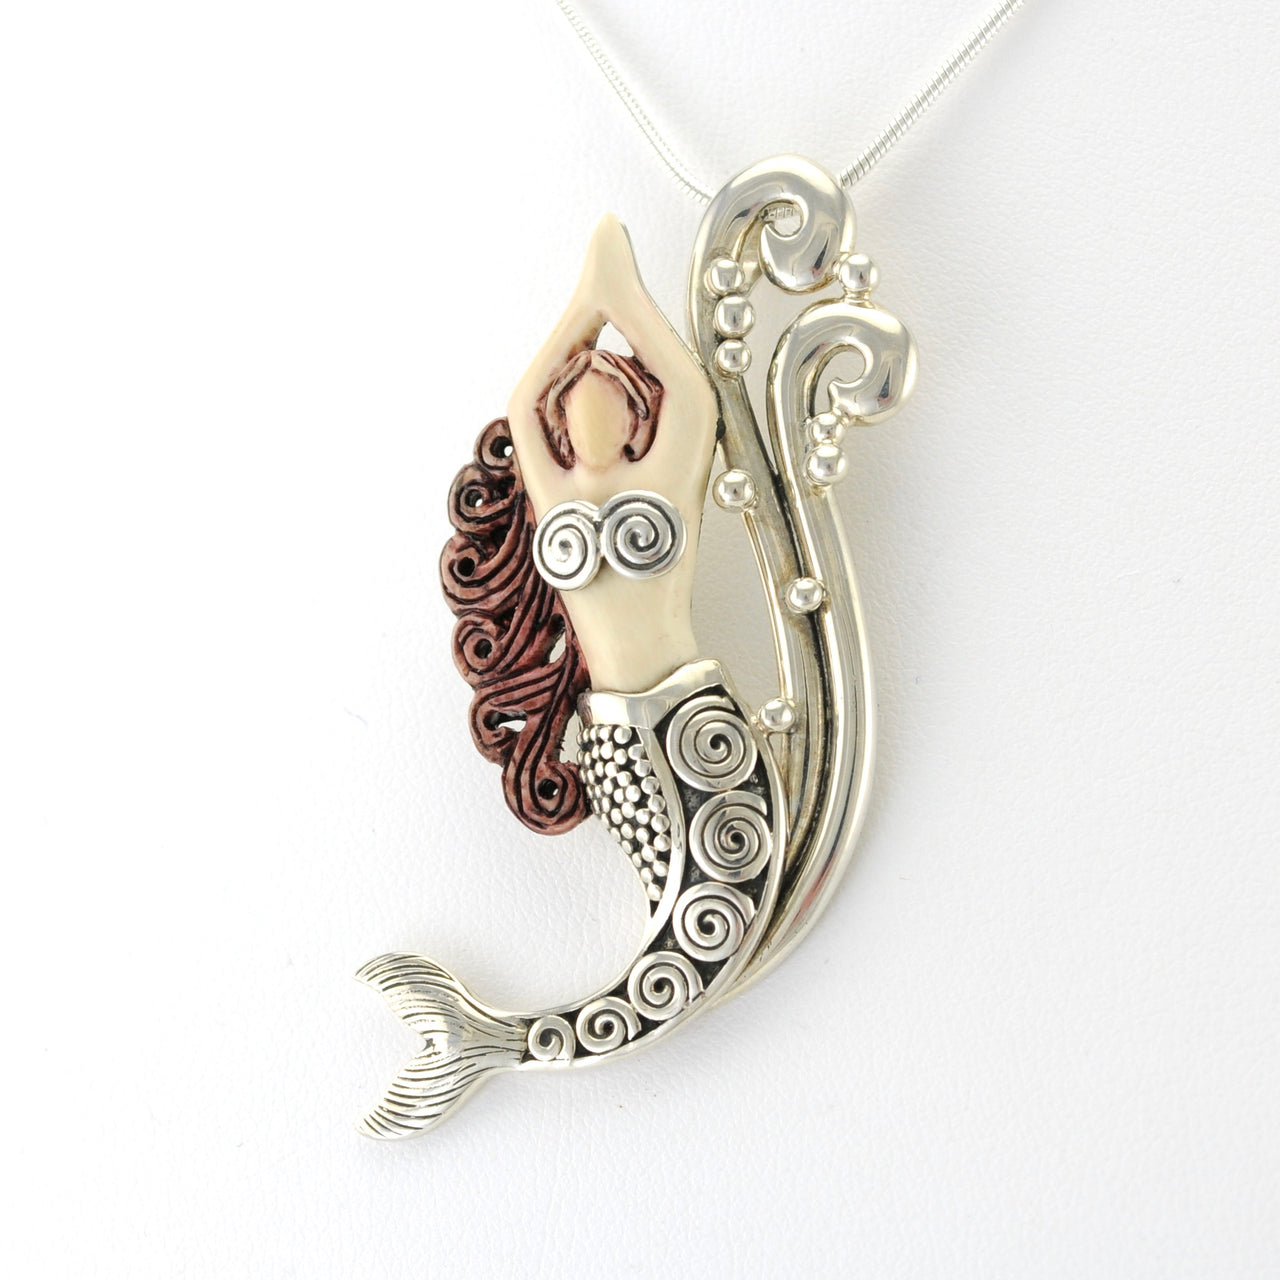 Fossilized Ivory with Sterling Silver Water Spirit Mermaid Pendant